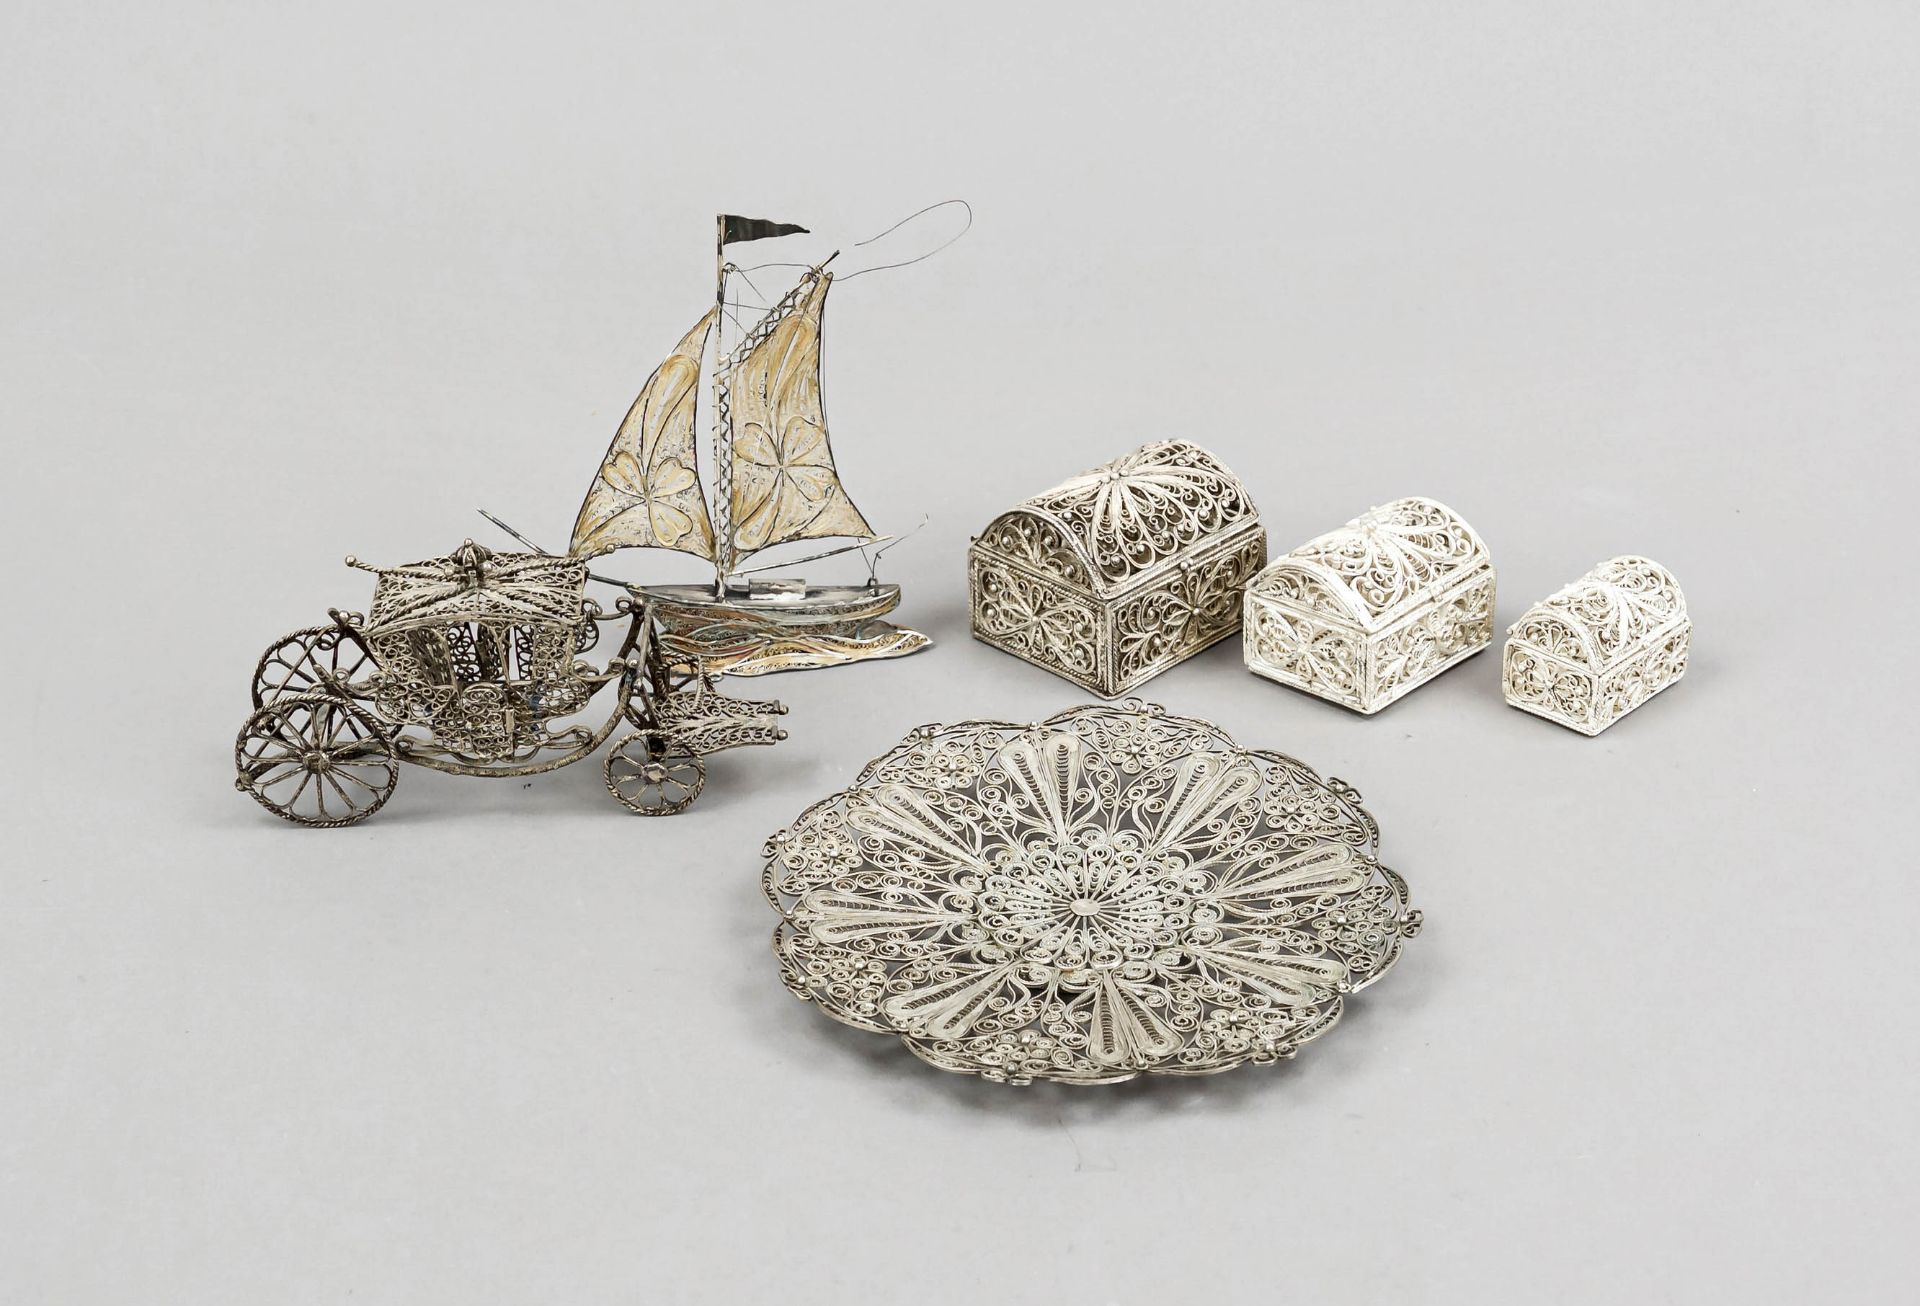 Six filigree pieces, 20th century, silver and plated, 3 stackable lidded boxes, sailing ship,